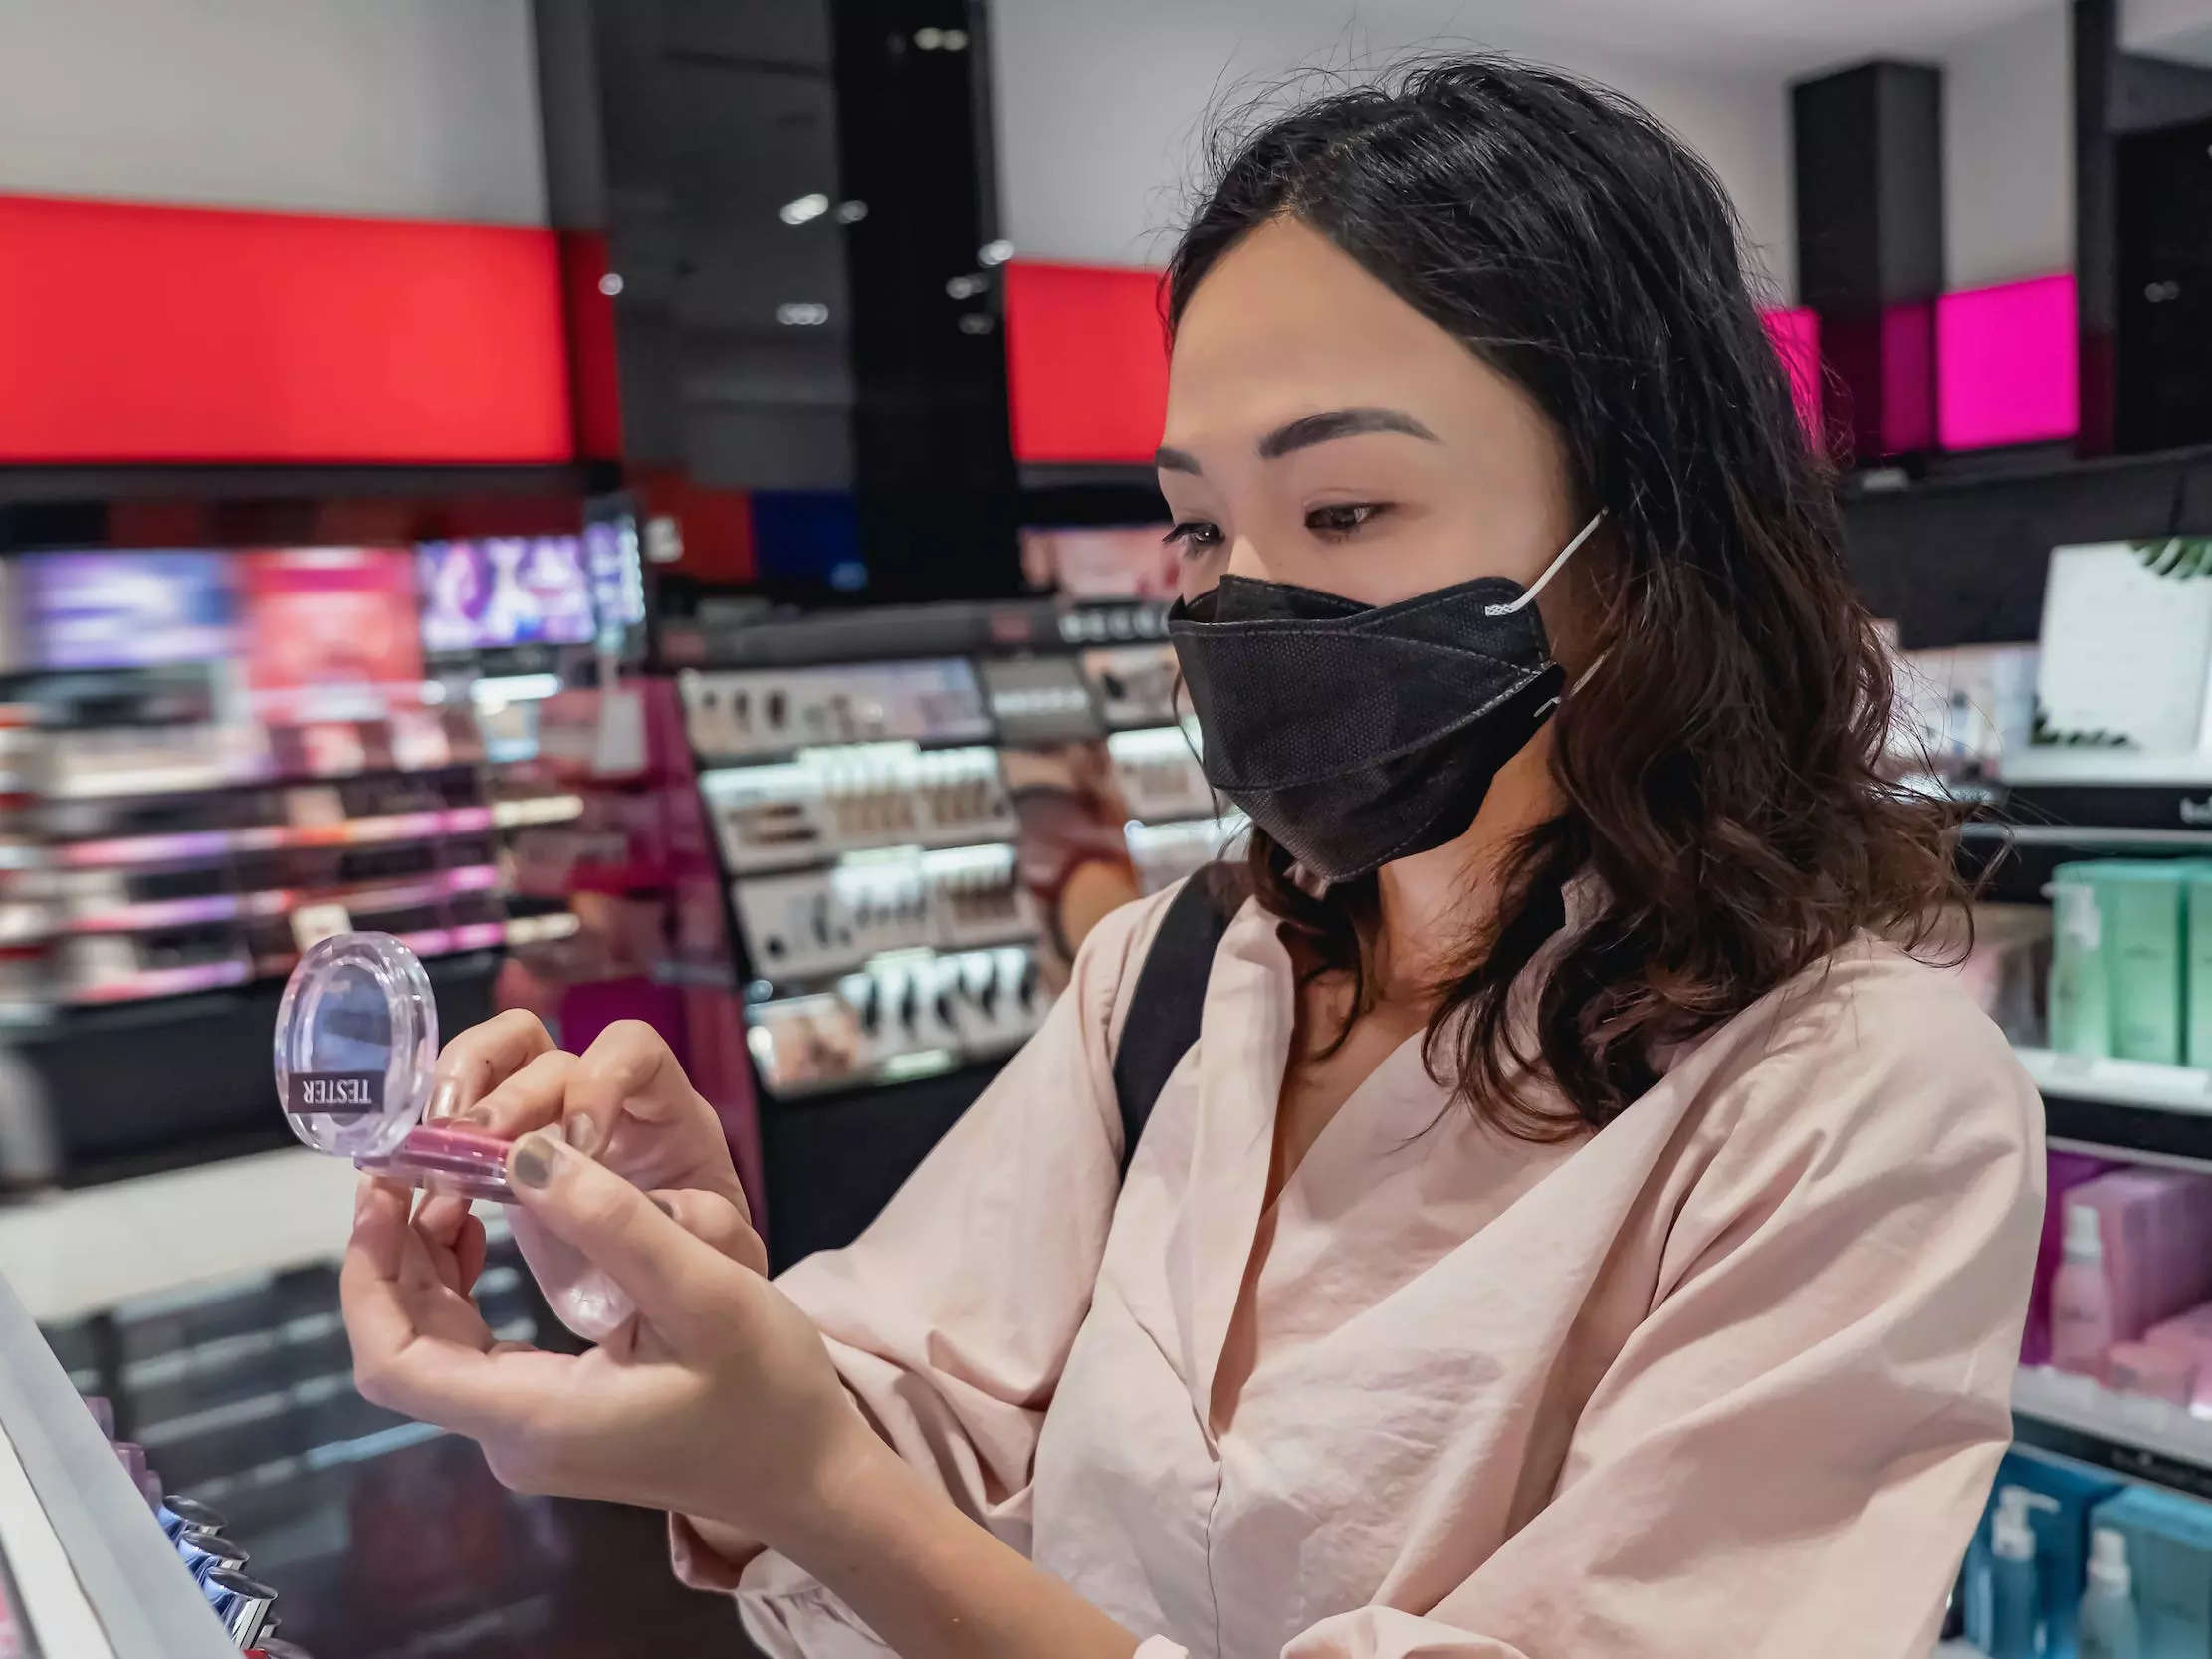 
Sales of blush are exploding thanks to a TikTok trend and the end of 'no makeup makeup'
